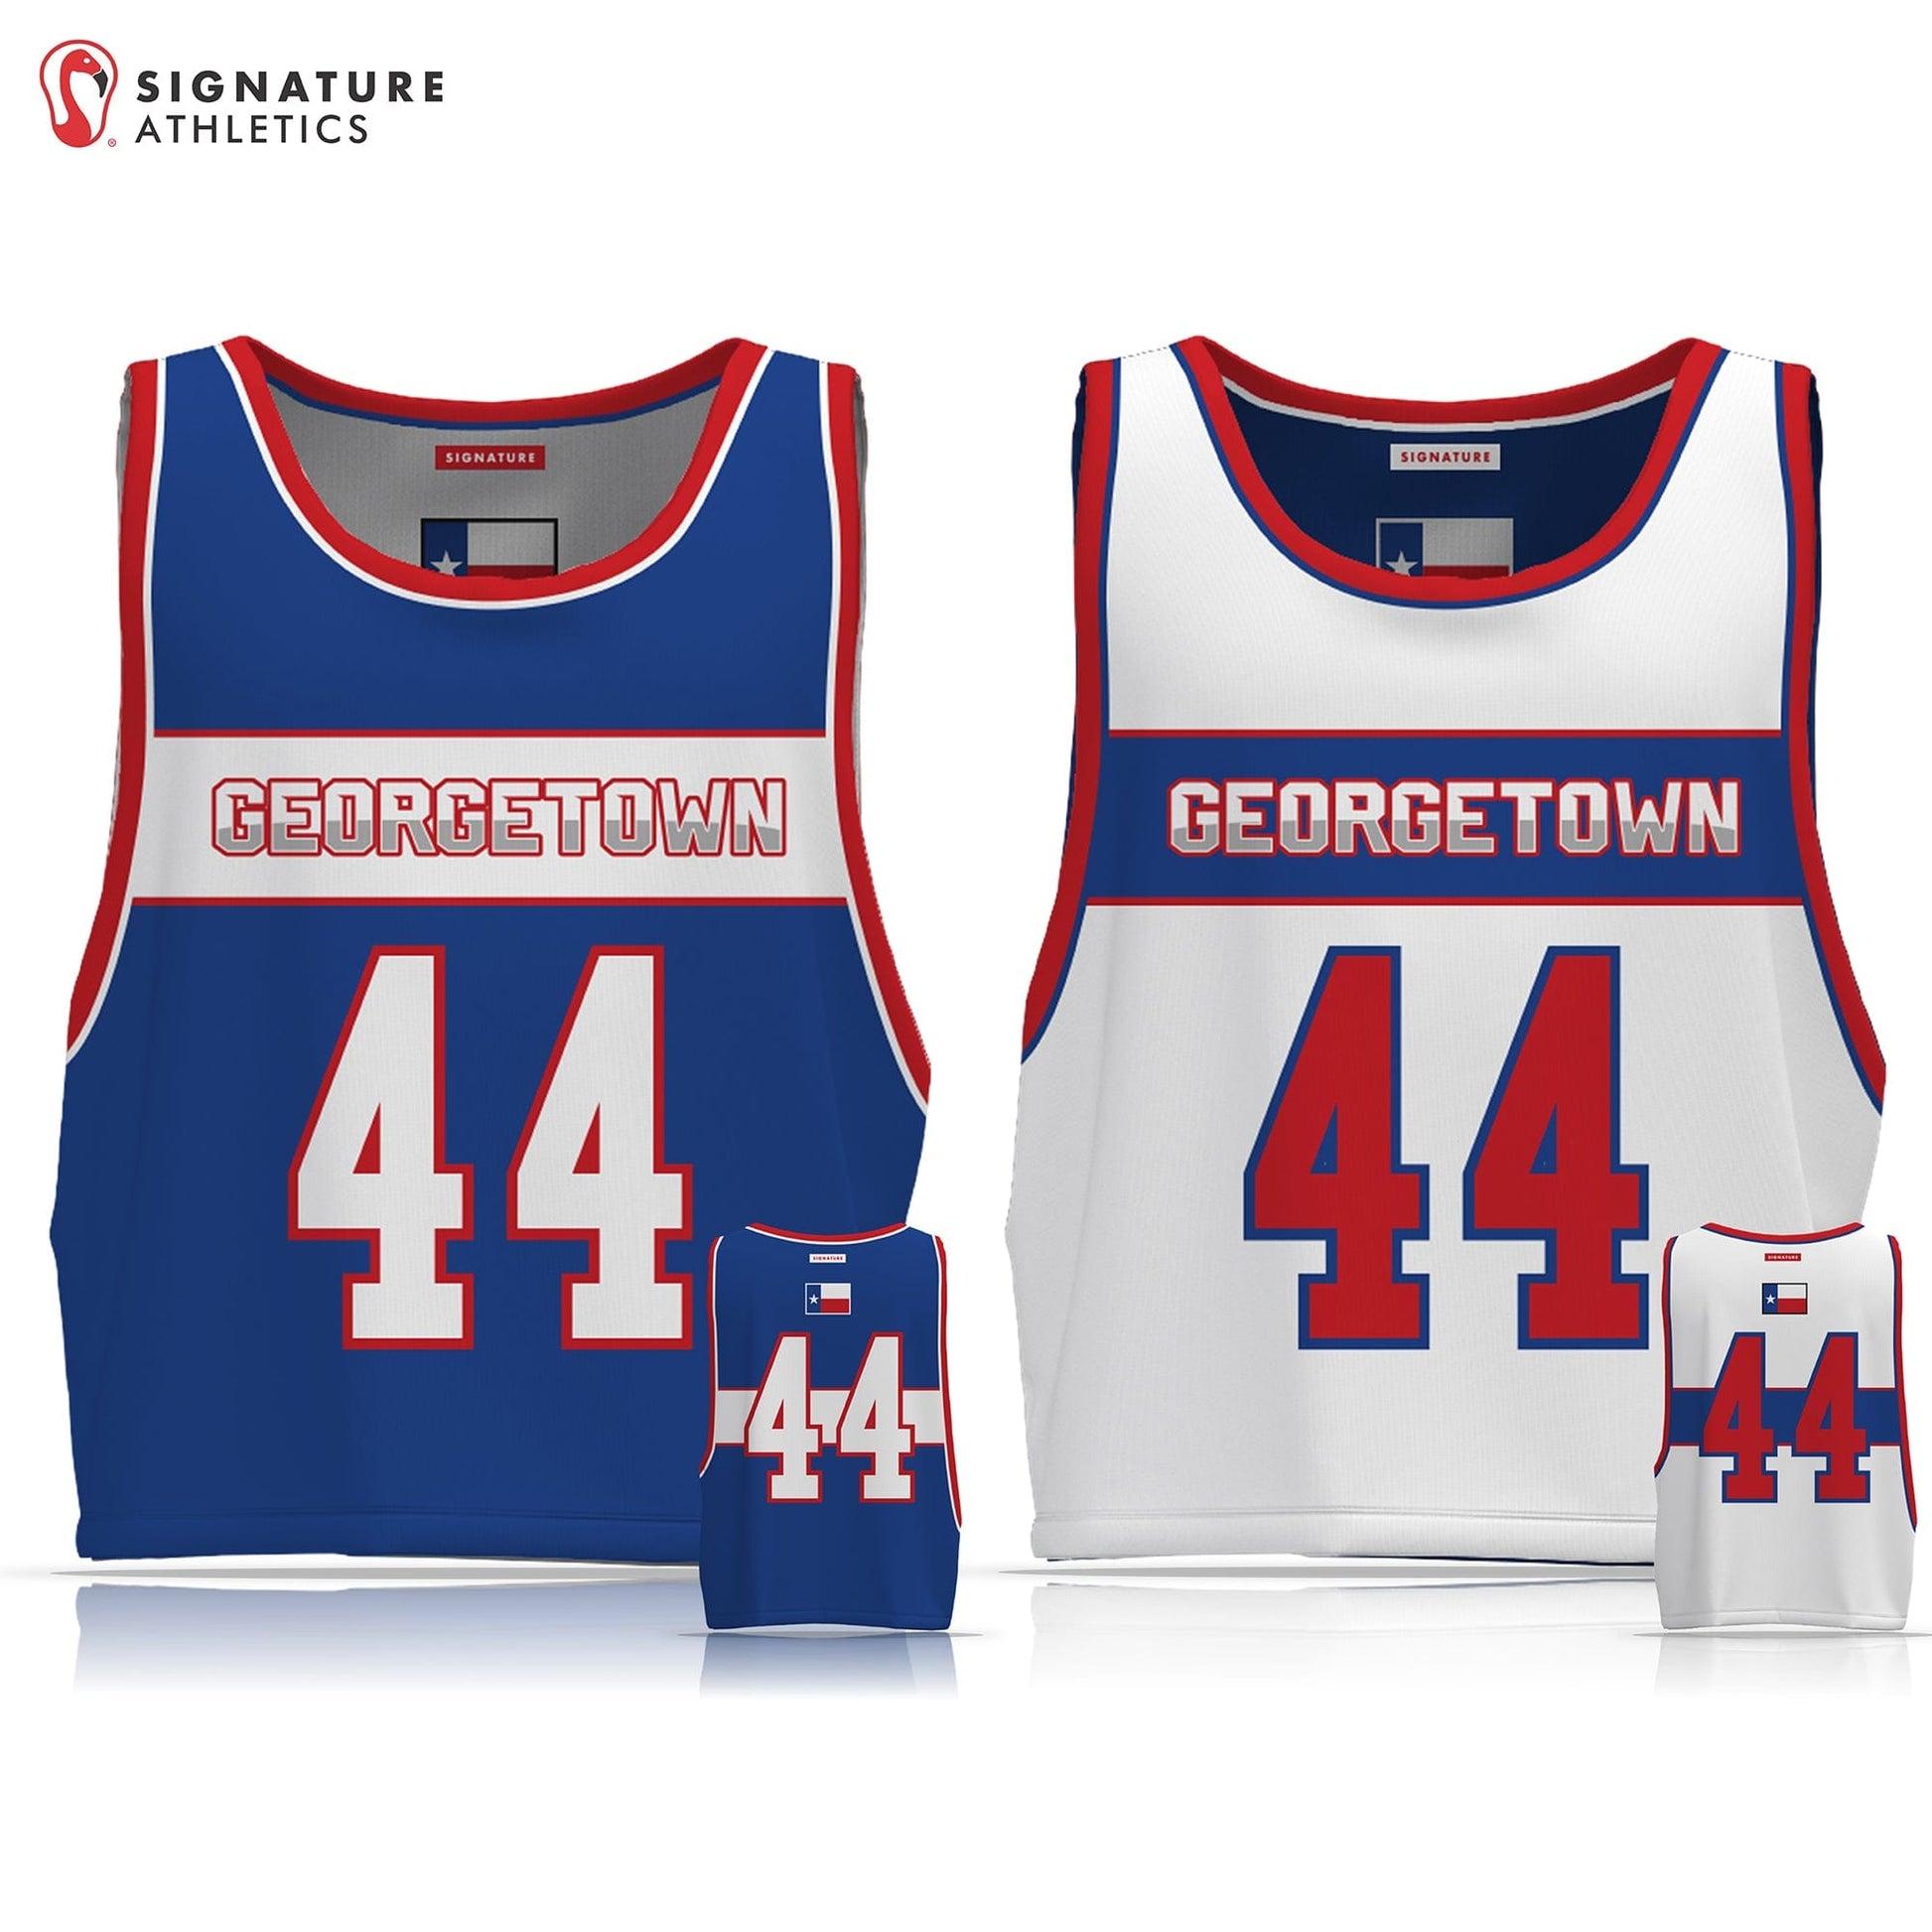 Georgetown Youth Lacrosse Men's Player Reversible Game Pinnie Signature Lacrosse